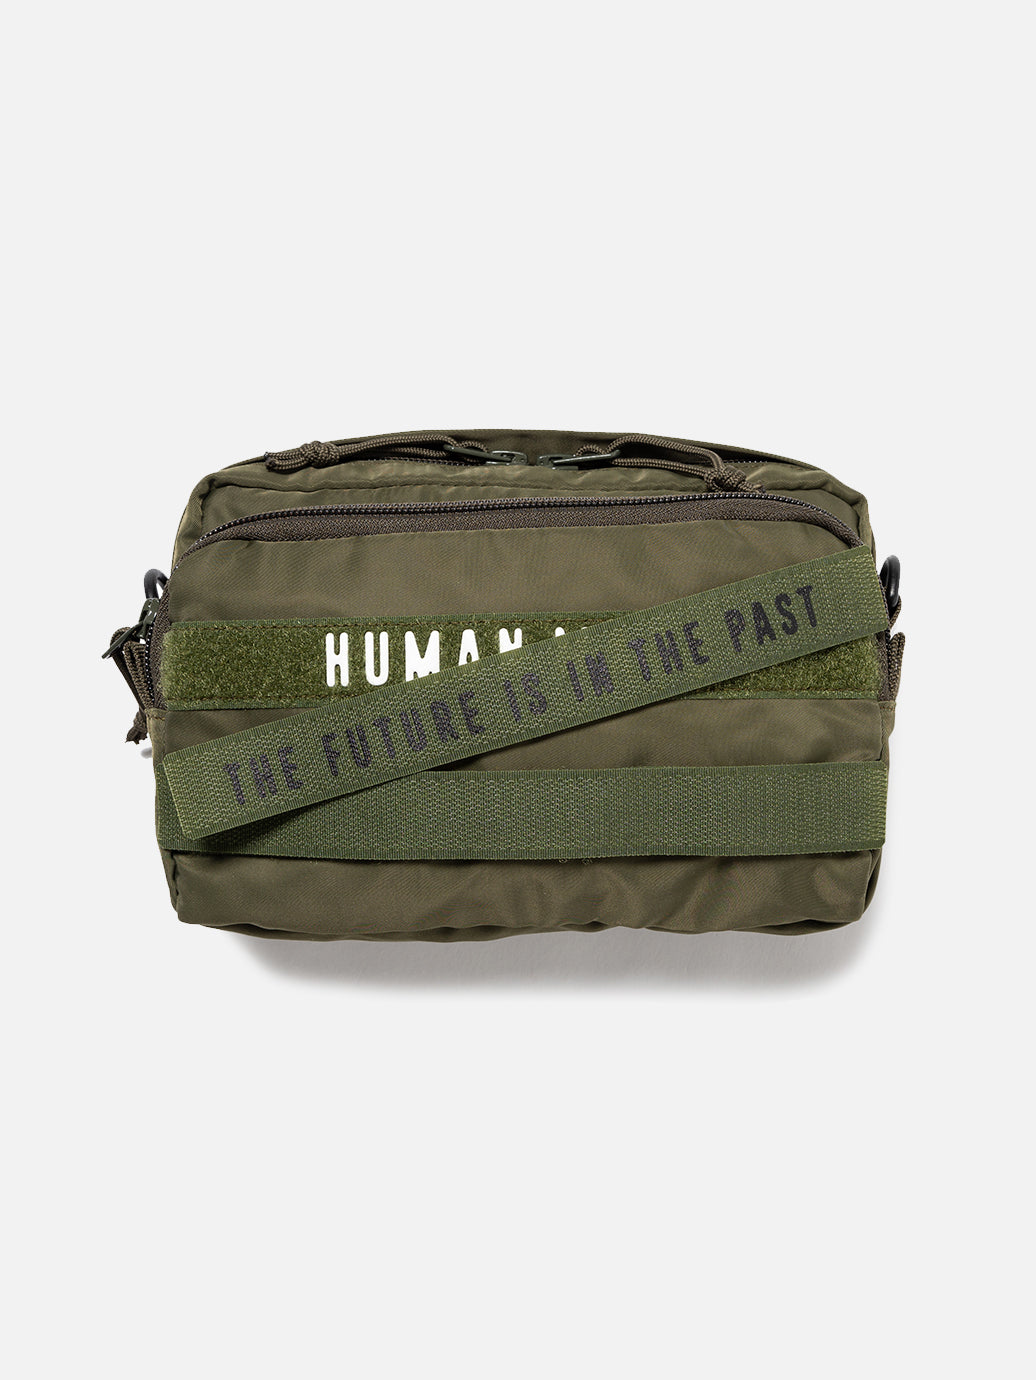 Human Made Military Pouch #1